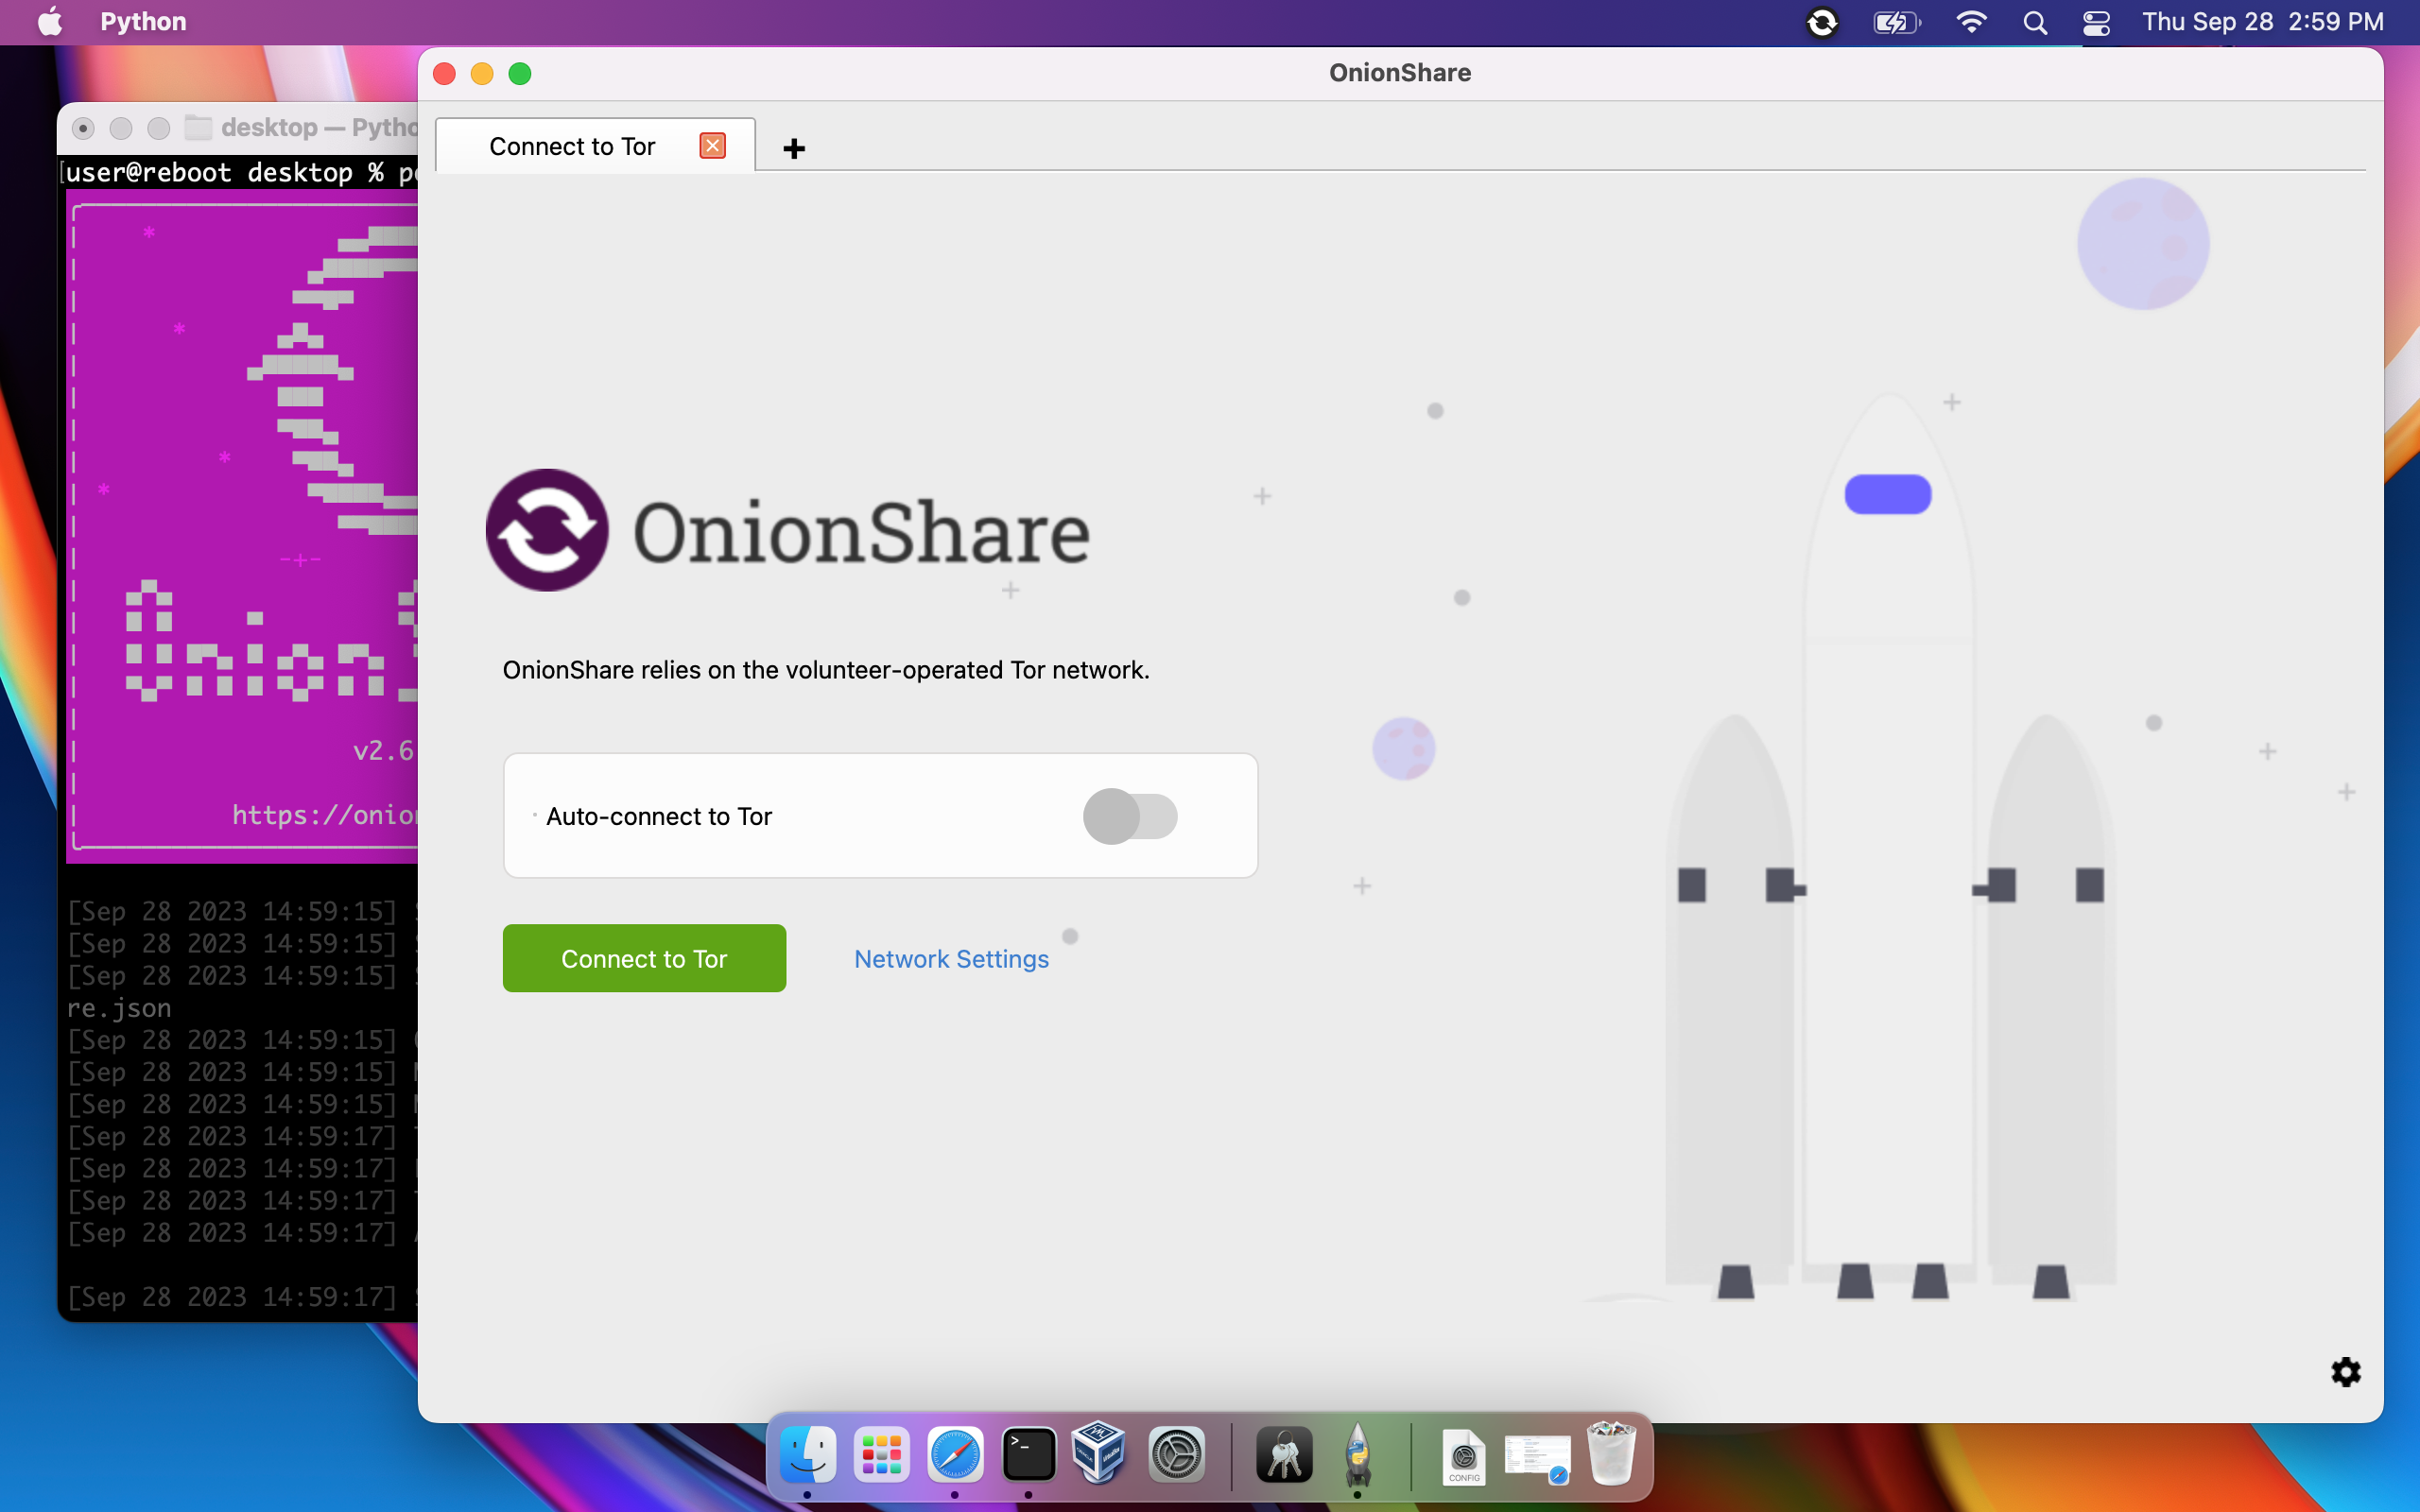 OnionShare in macOS